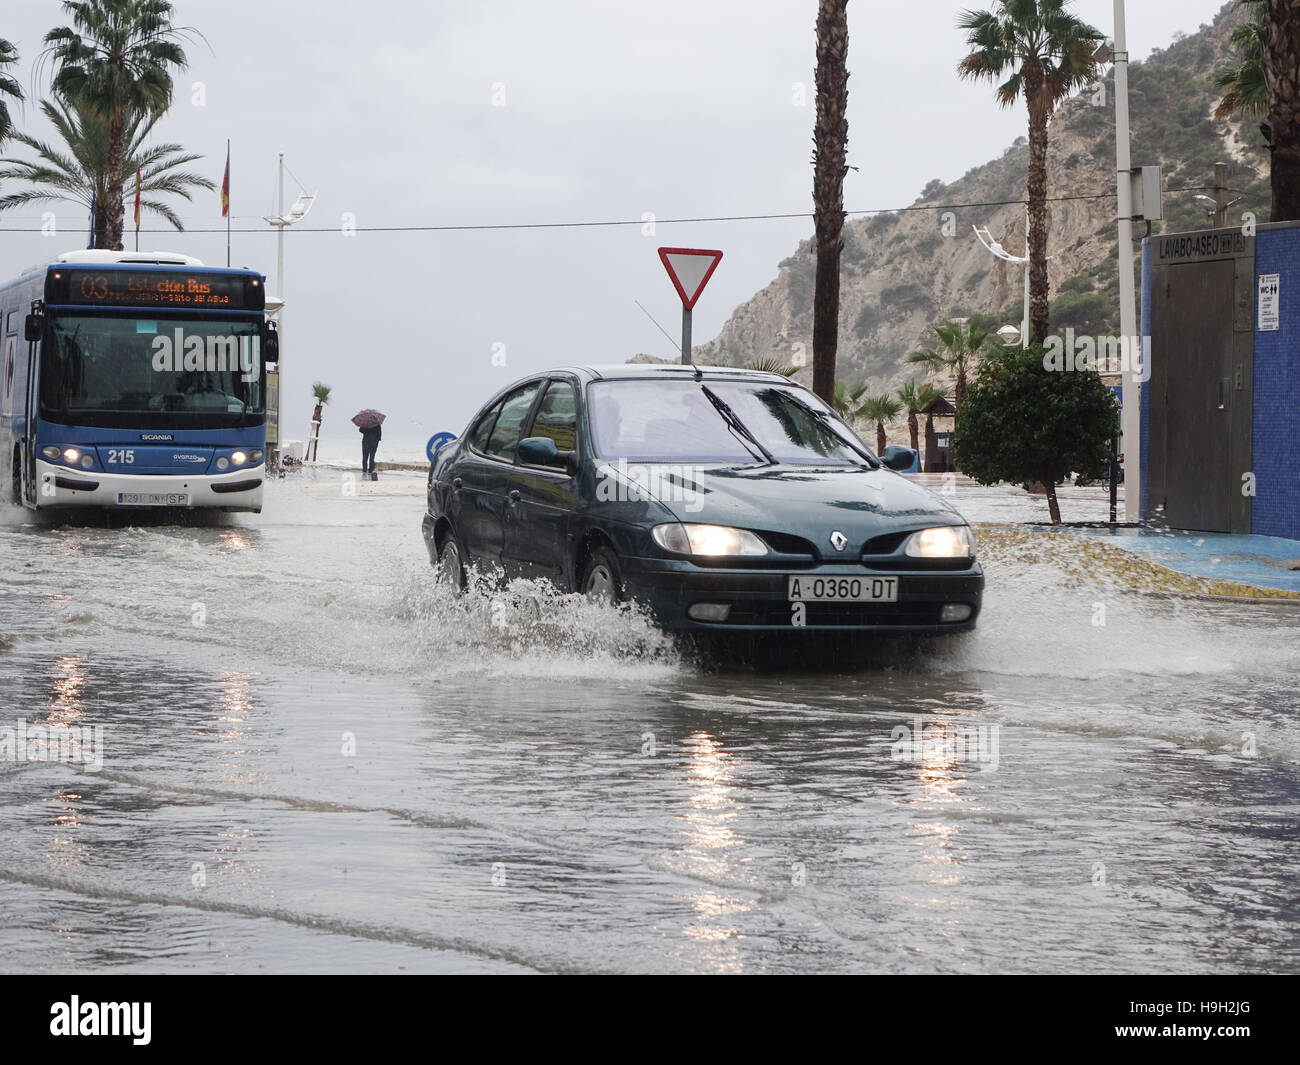 Vehicles drive through flooded streets in La Cala, Benidorm, Alicante province, Spain after a storm and flash flooding on the streets. Stock Photo